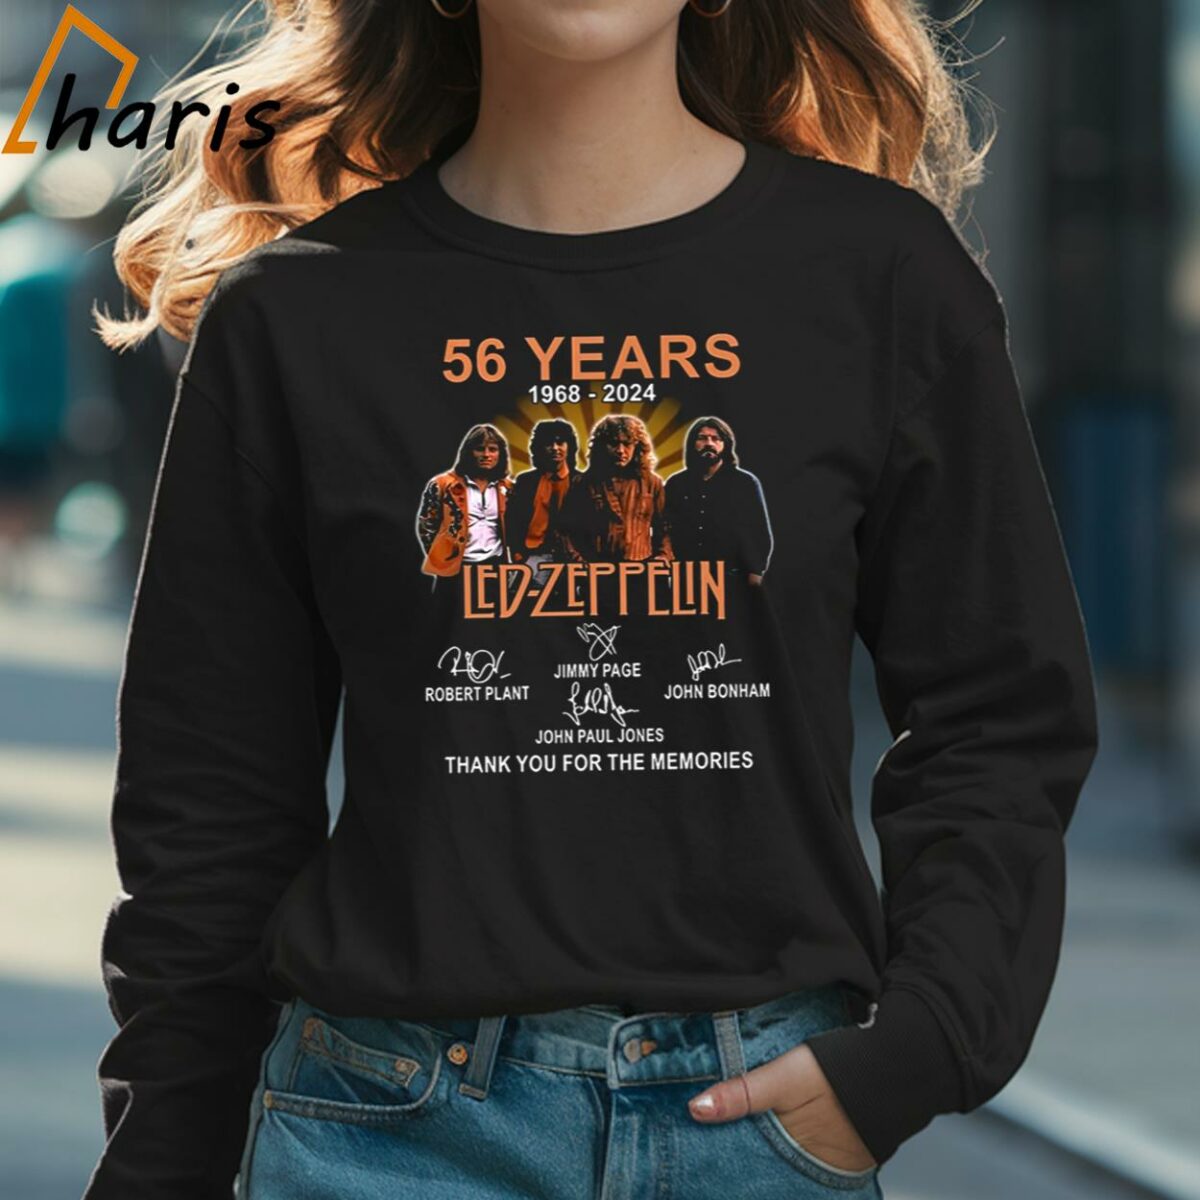 56 Year 1968 2024 Led Zeppelin Thank You For The Memories T Shirt 3 Long sleeve shirt